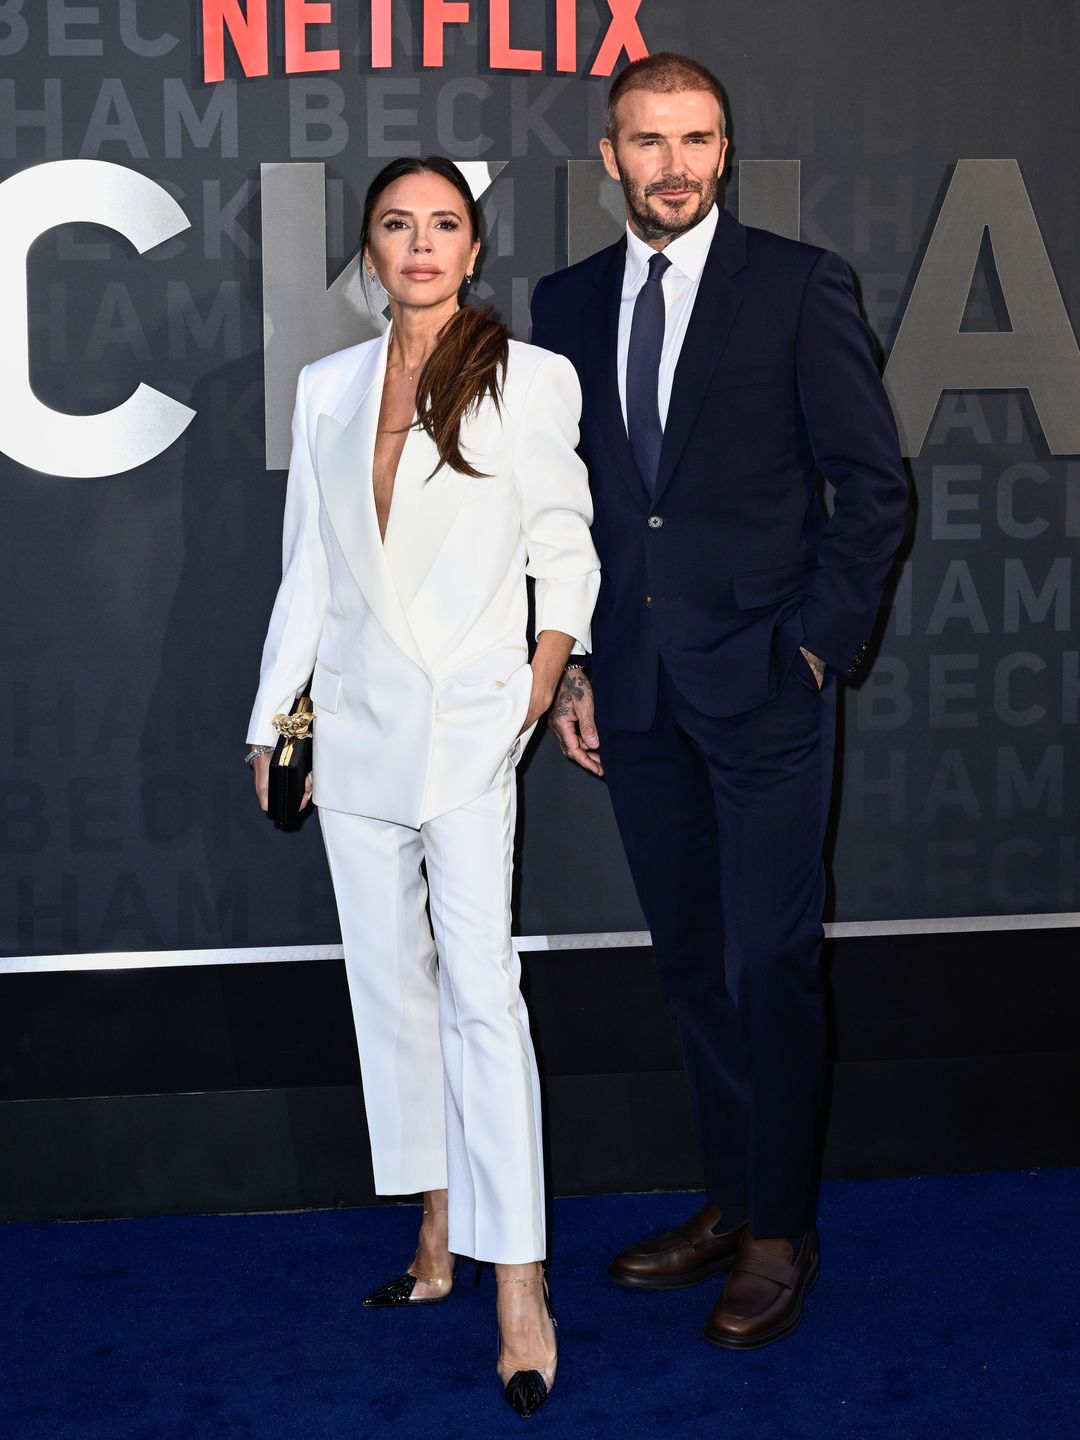 Victoria and David Beckham pose on the red carpet for the Netflix 'Beckham' UK Premiere. Victoria sports a white suit and David a navy blue.